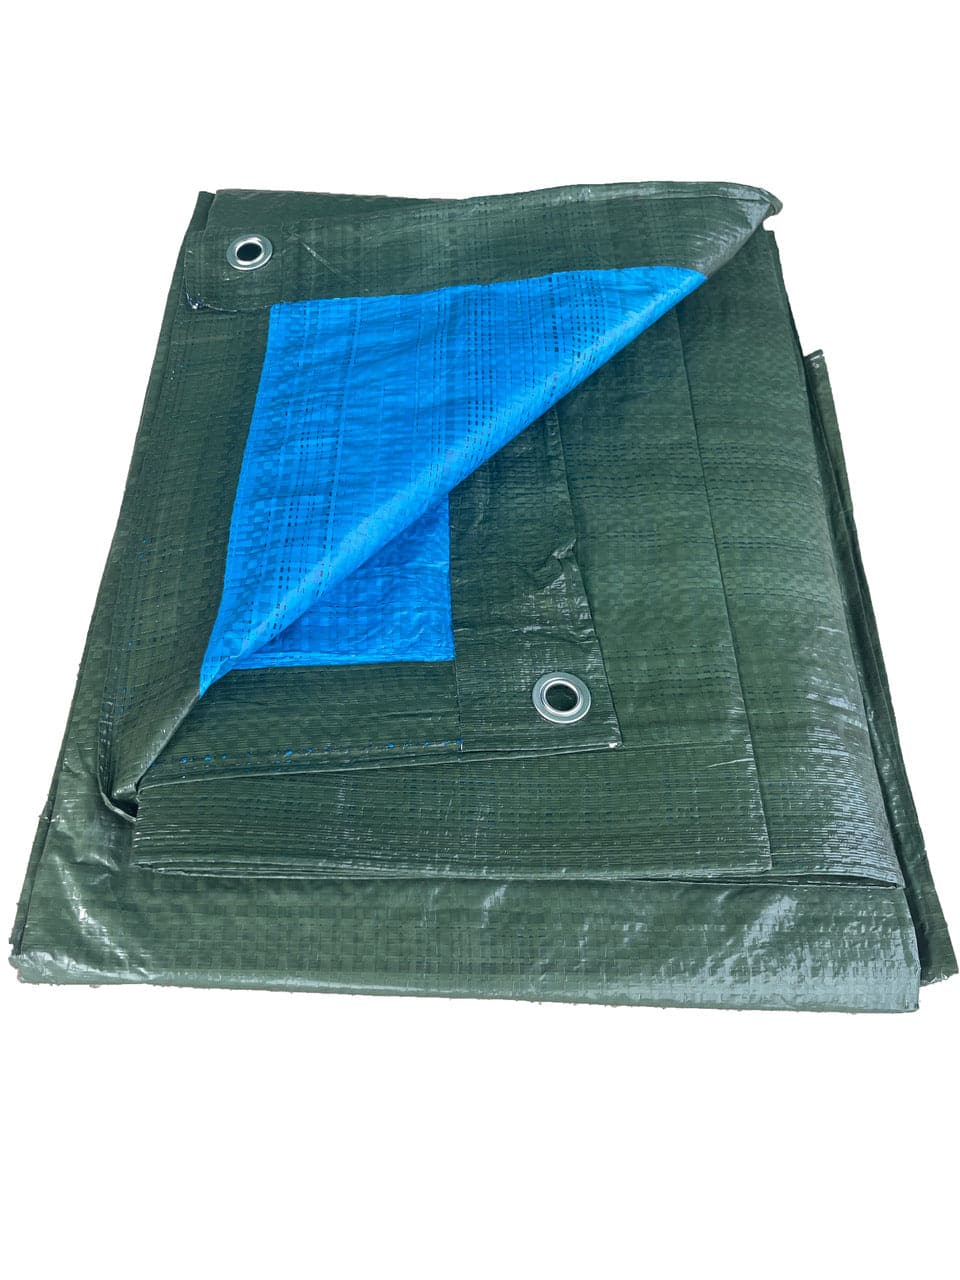 PROTECTIVE SHEET WITH EYELETS 6 X 8 M 90 G/SQ M - best price from Maltashopper.com BR500008817